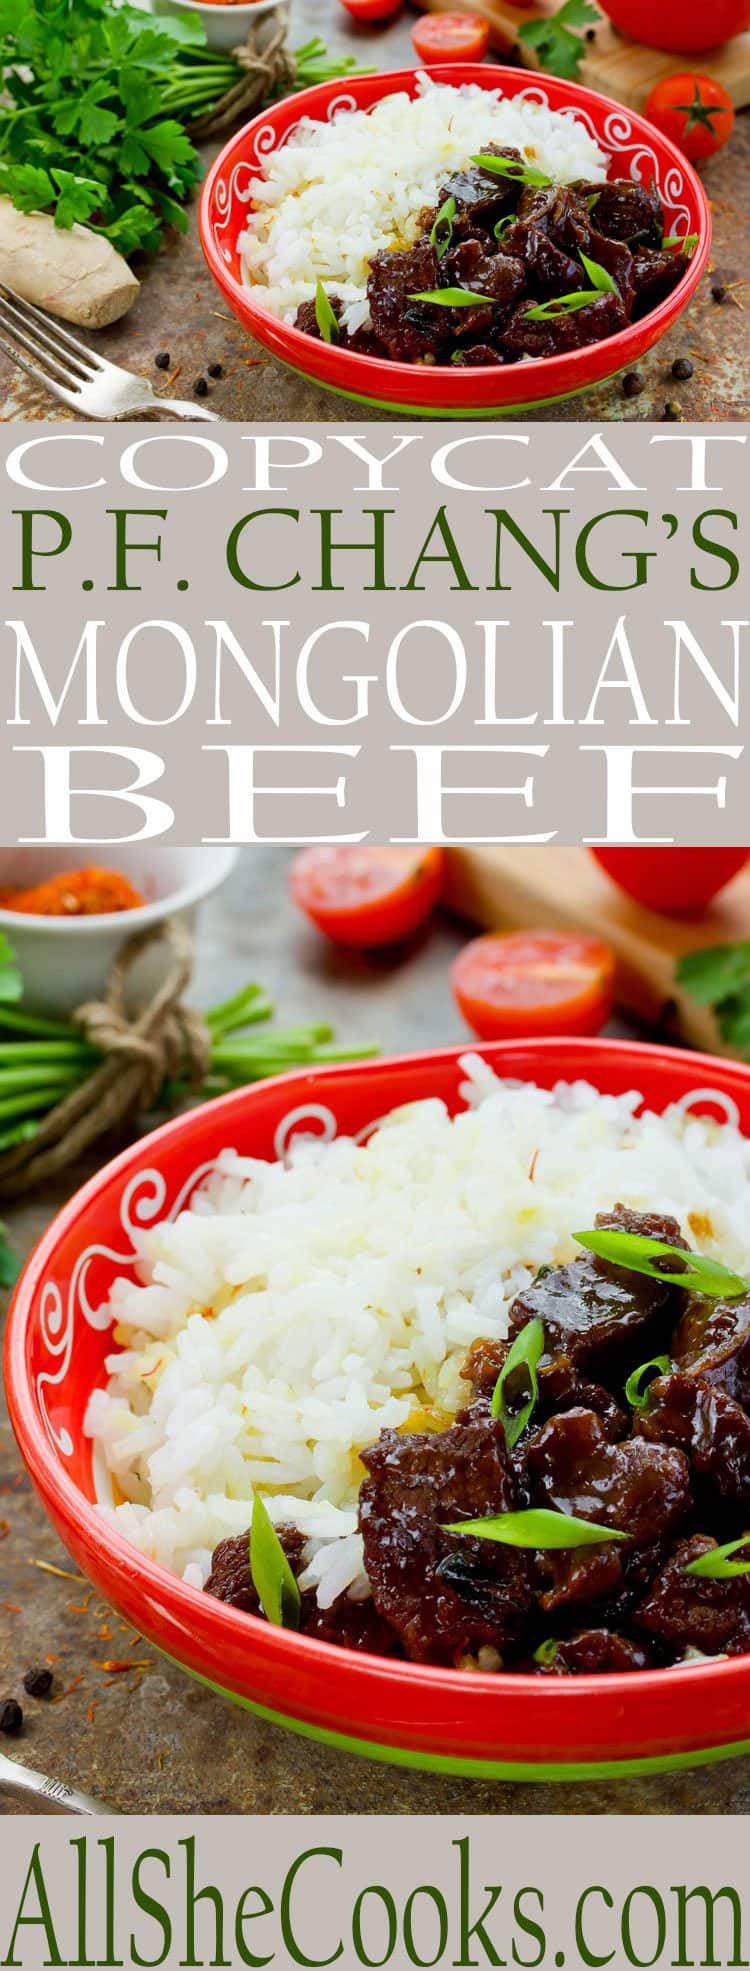 Mongolian rice with beef in red bowl with tomato and cilantro in background